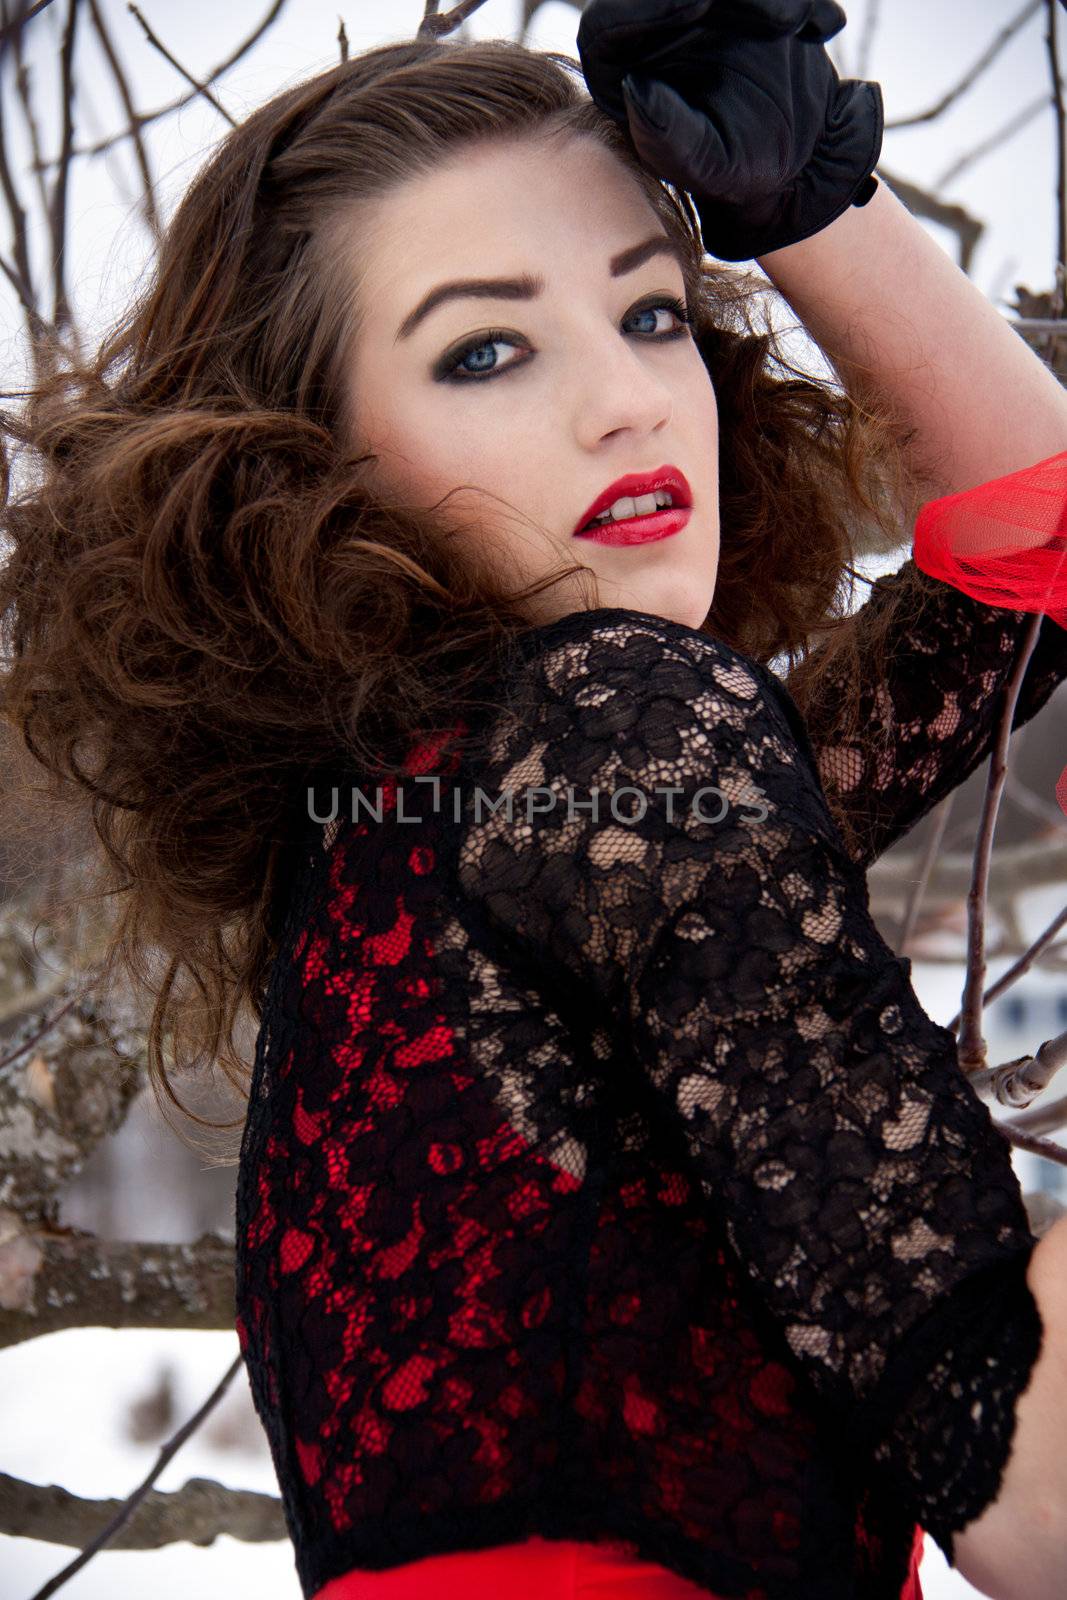 beautiful young woman outside in winter with dark hair and red lips